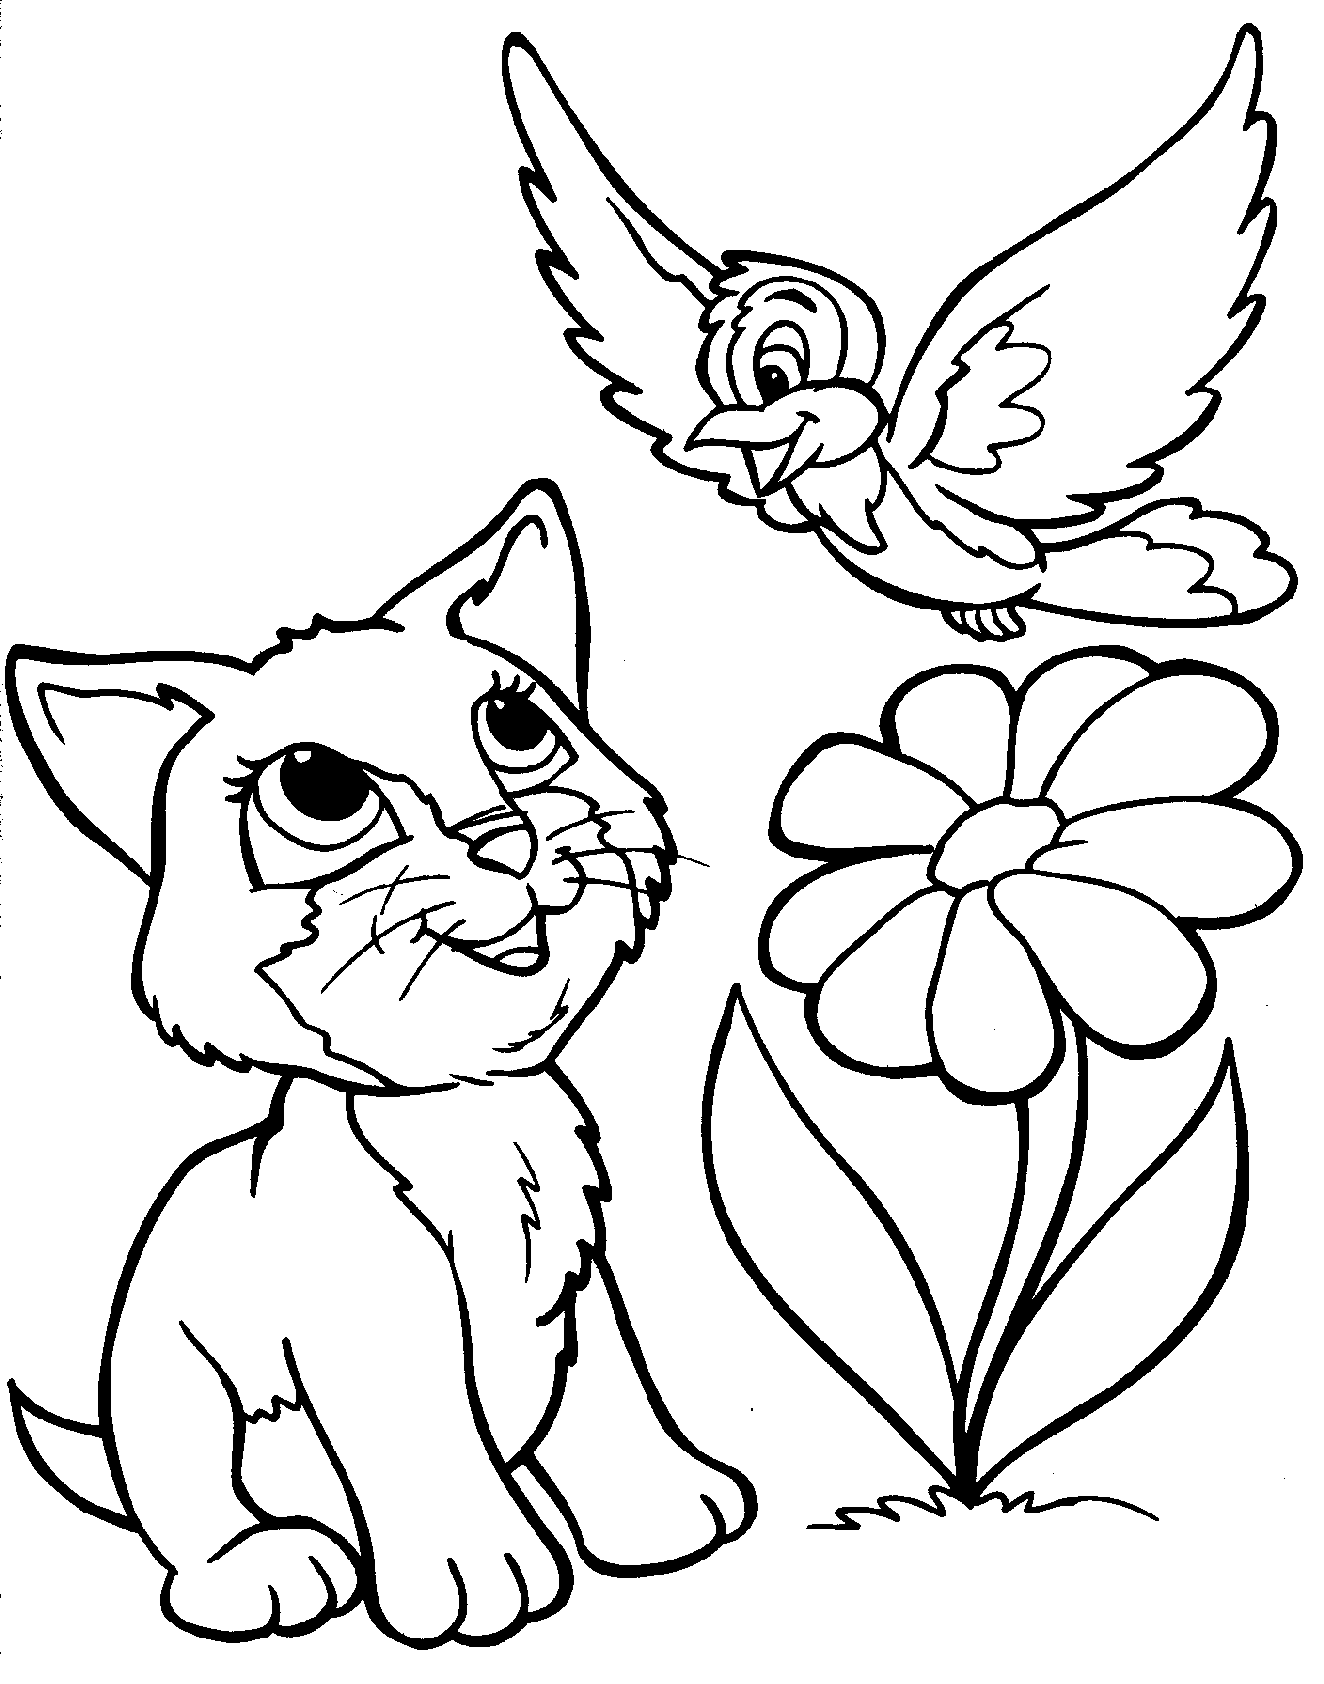 e kittens Colouring Pages